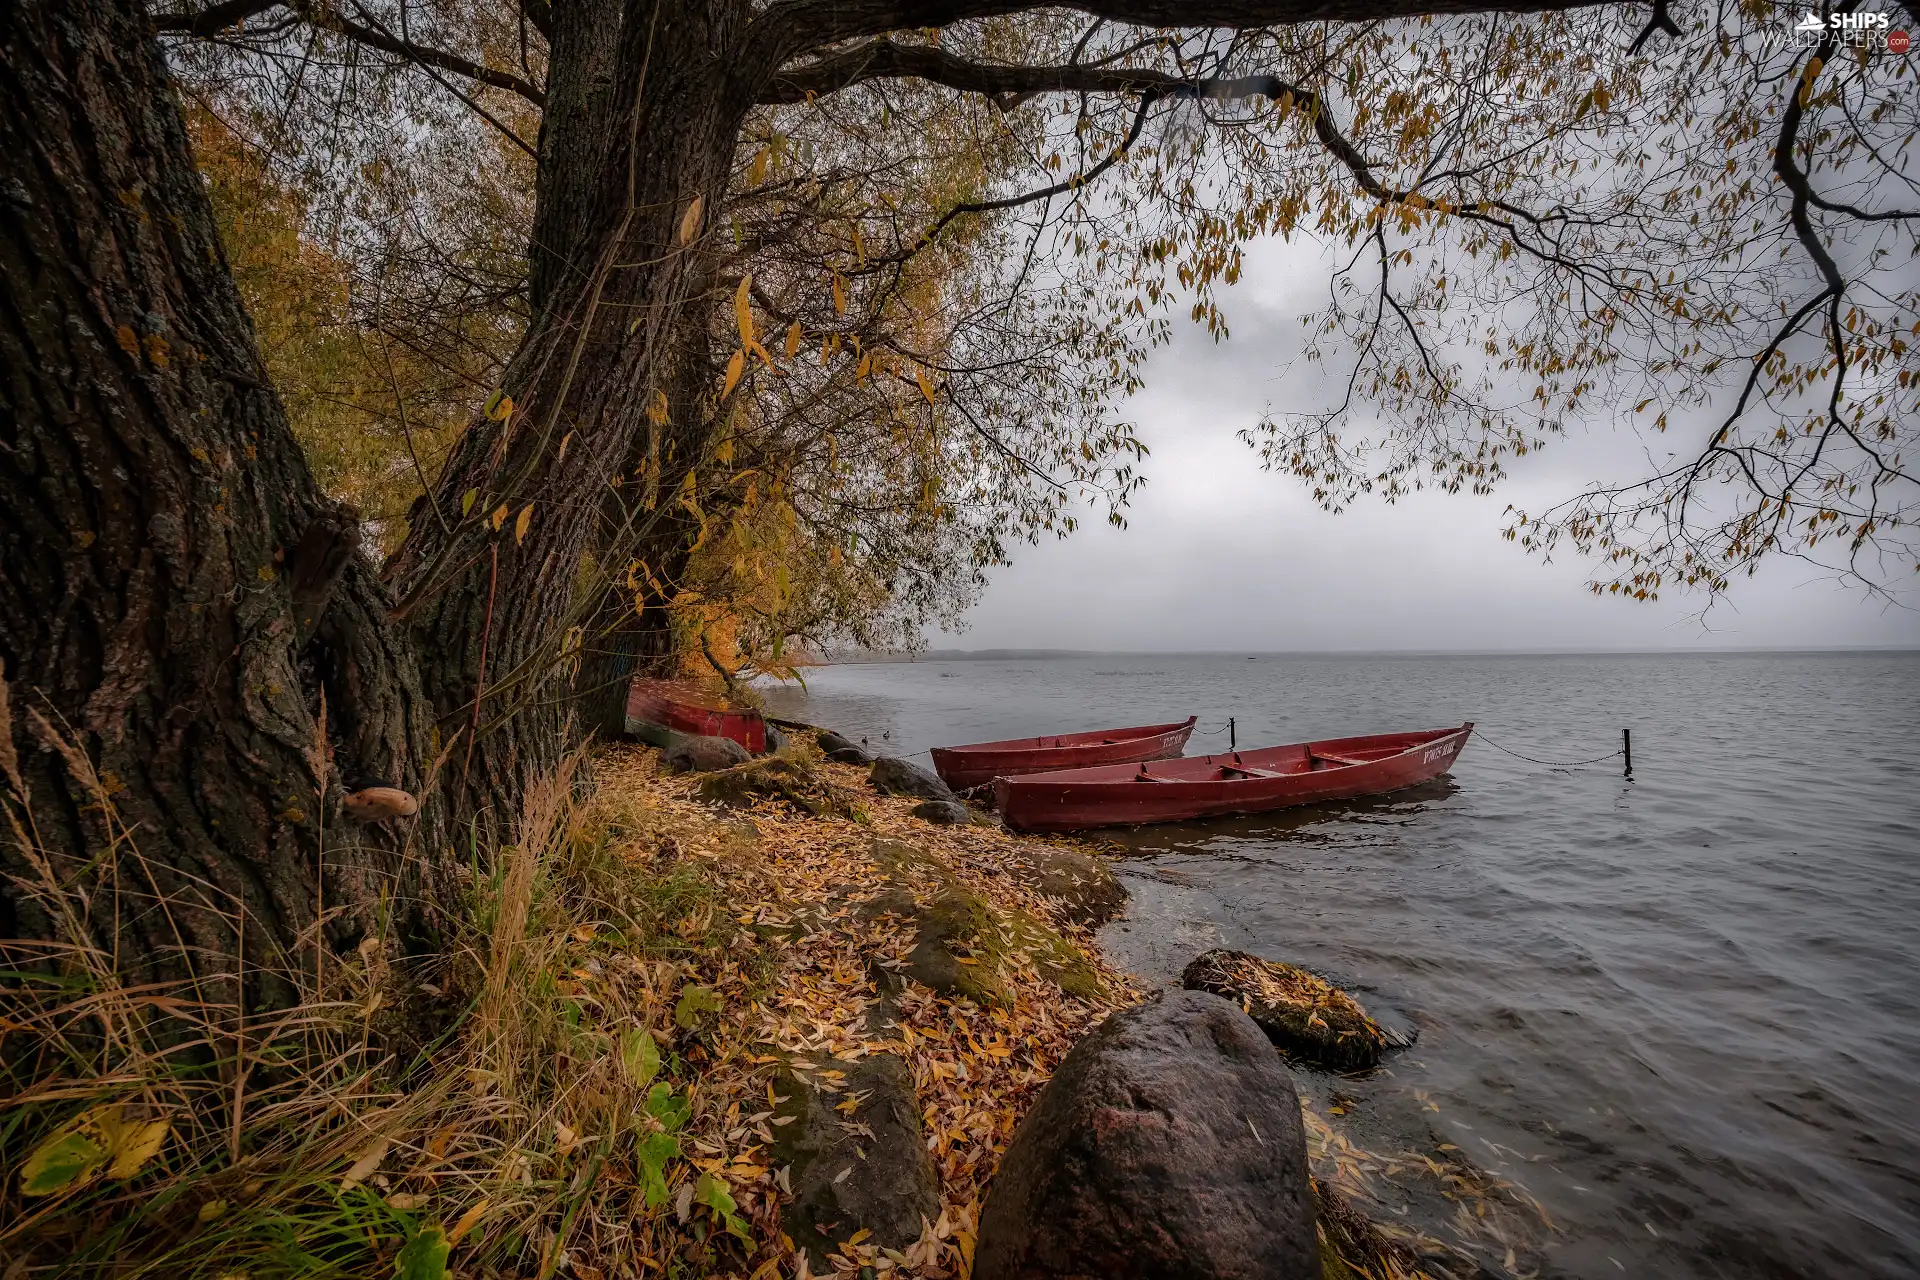 viewes, boats, lake, trees, autumn